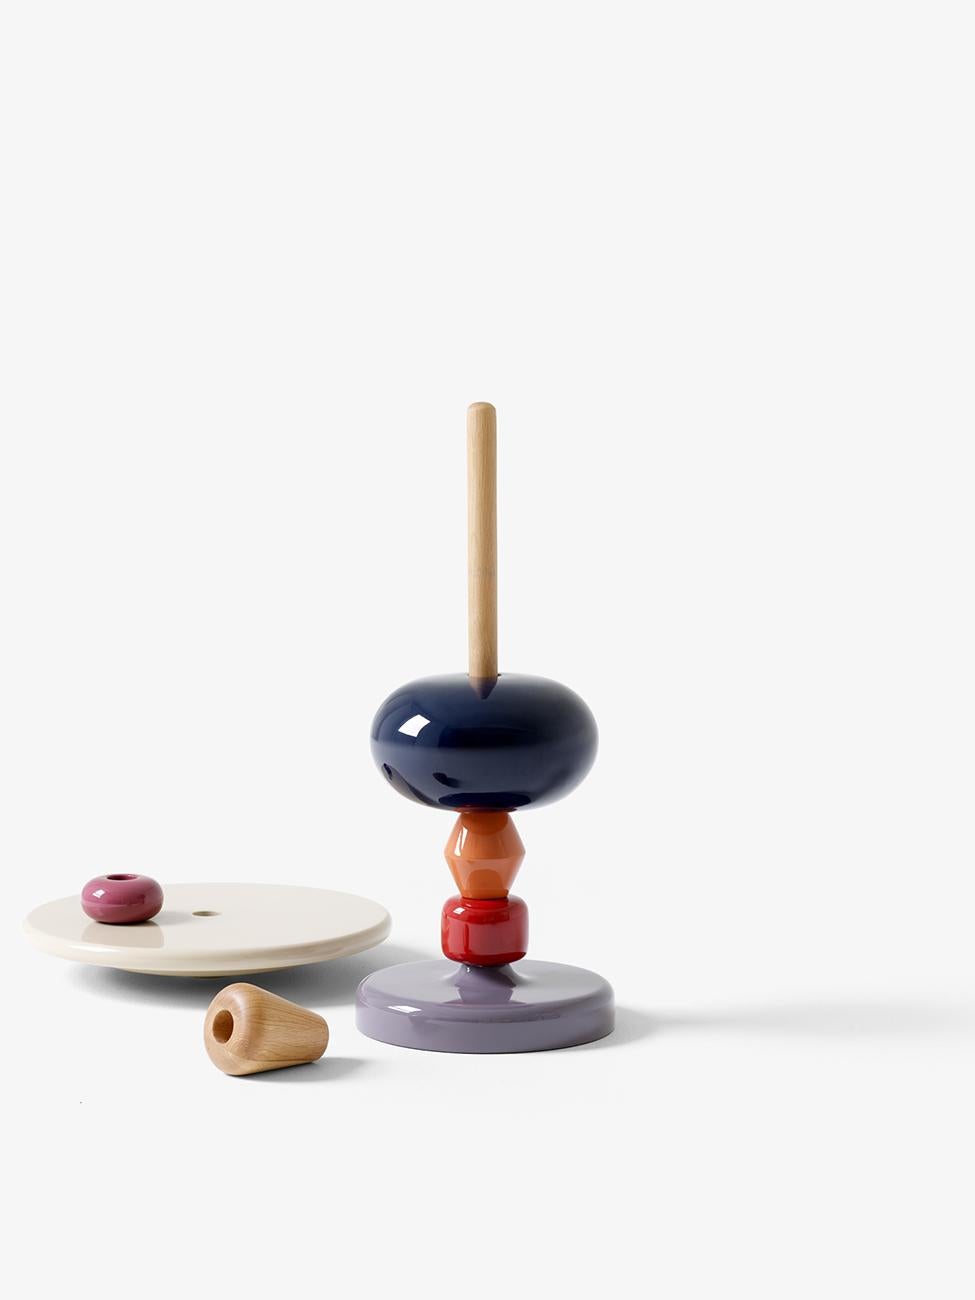 The shuffle side table in array colors seems to conjure images of classic wooden toys and with good reason. 
The choice of colors and the fact that you can unify and construct the table as you like are all ideas Mia Hamborg got from the Brio